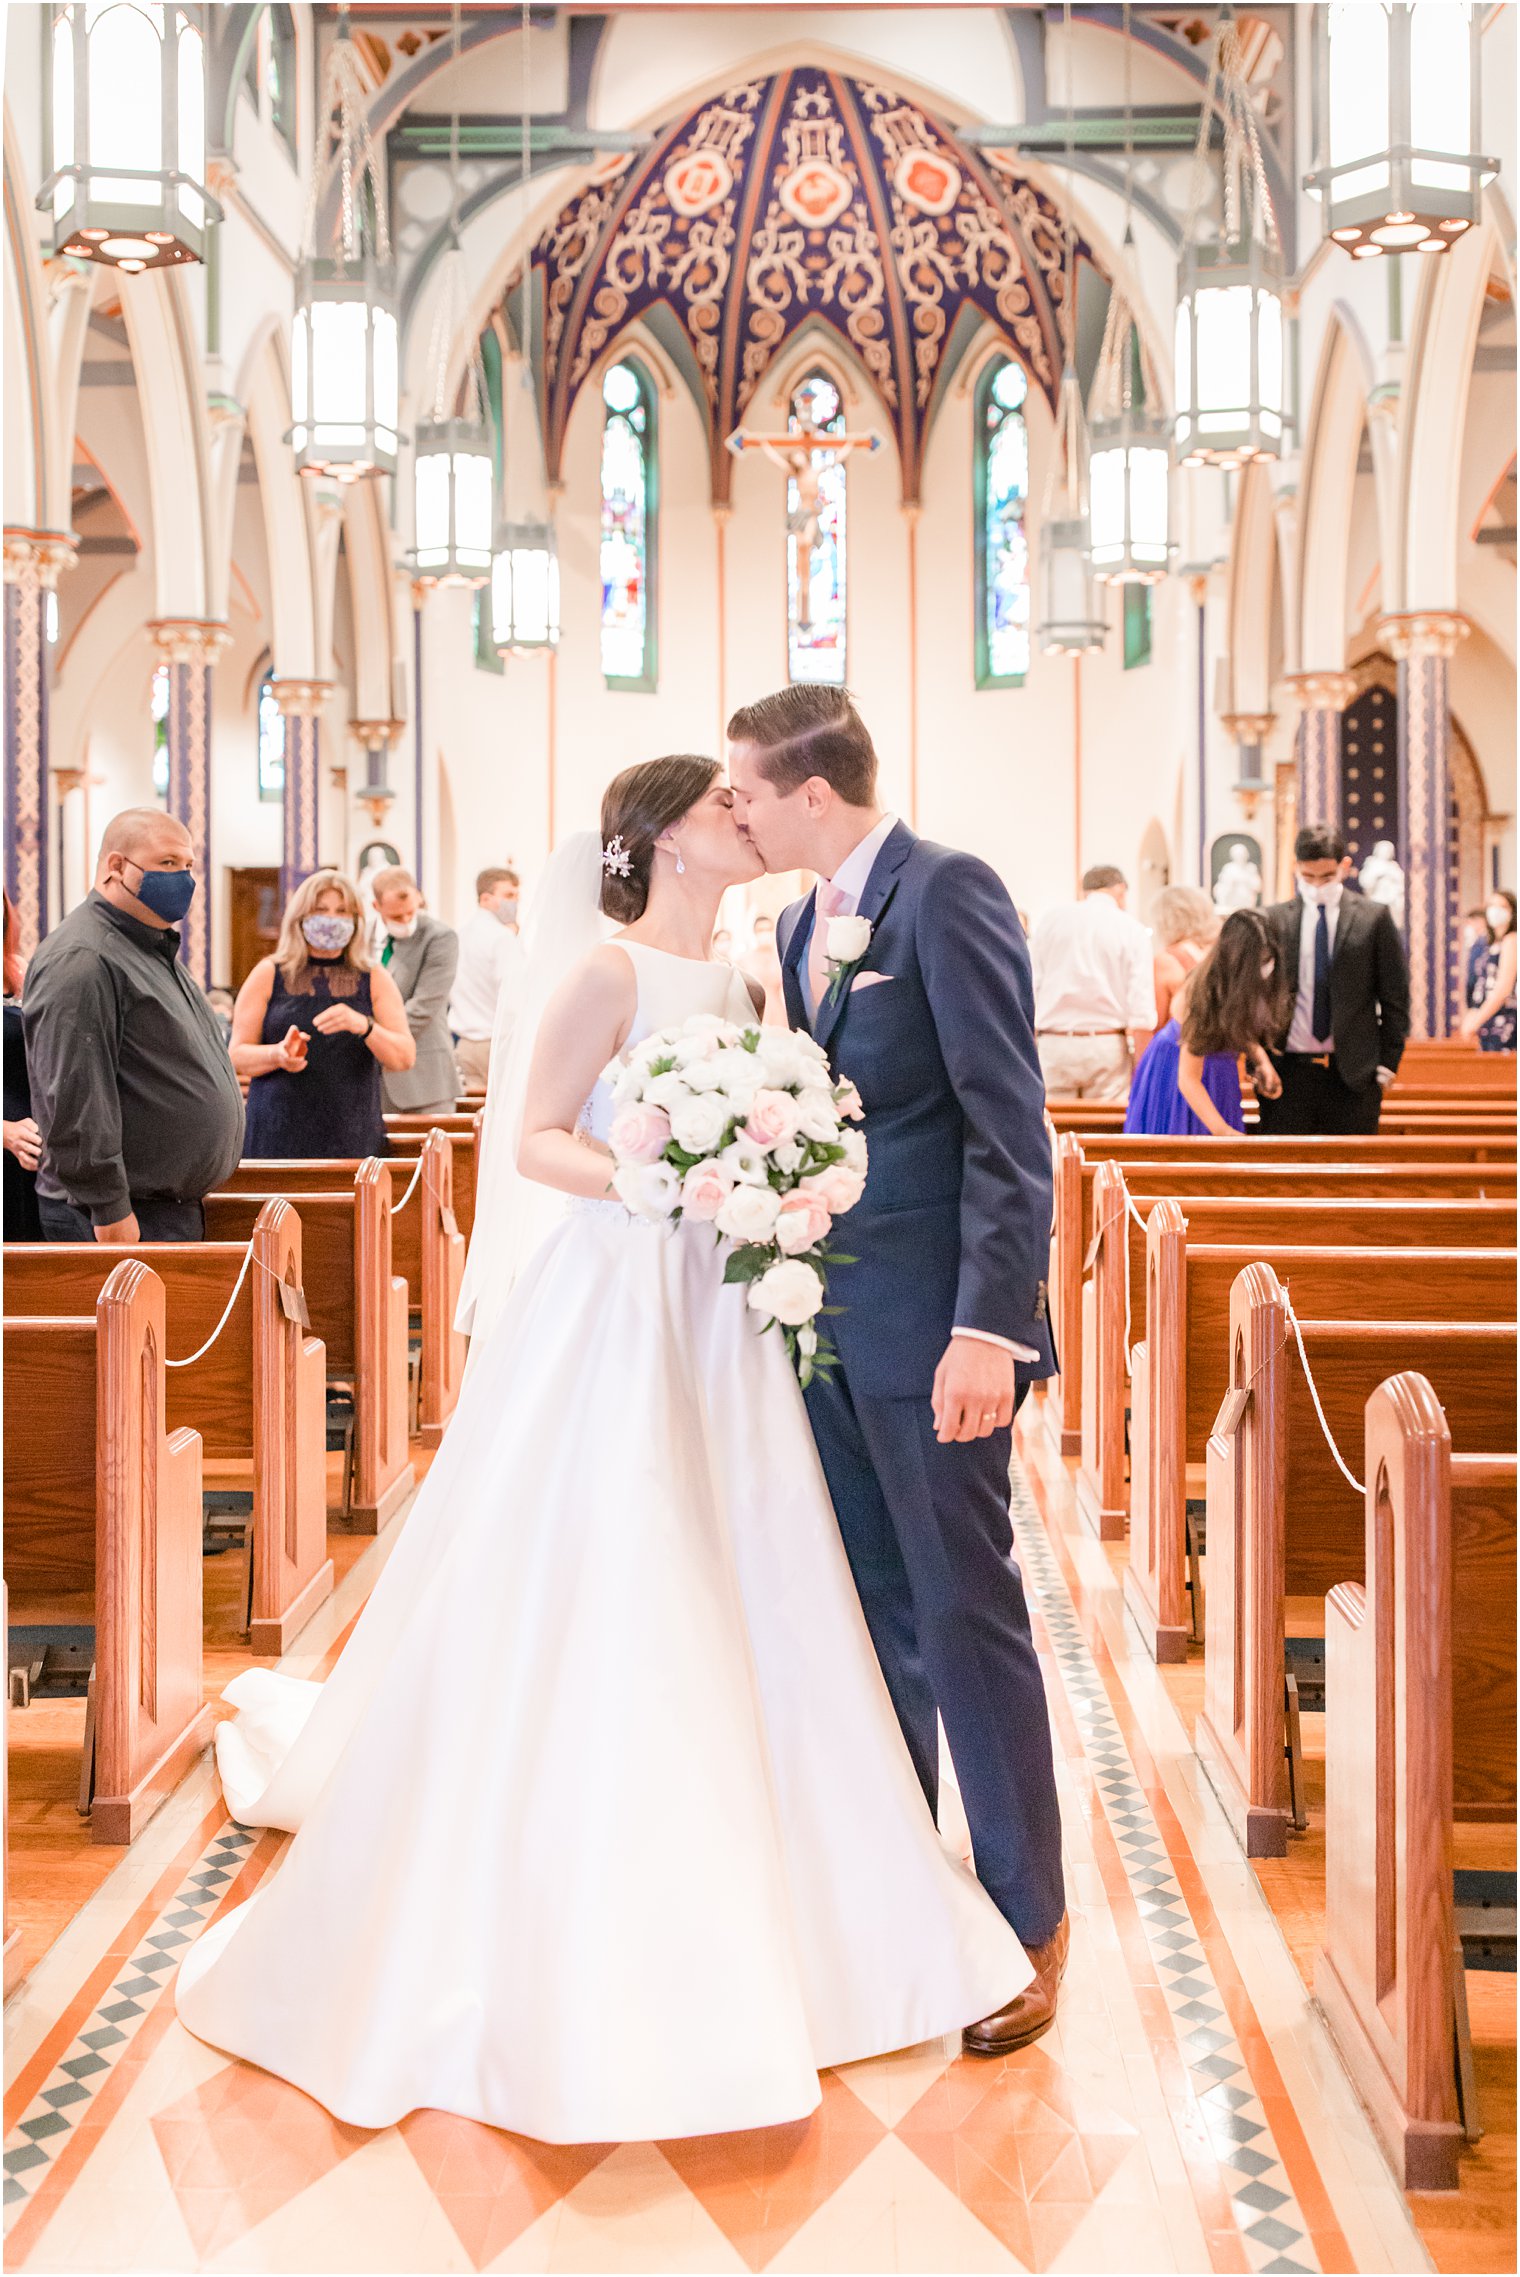 Bride and groom kissing at the aisle at Church of the Assumption in Morristown, NJ